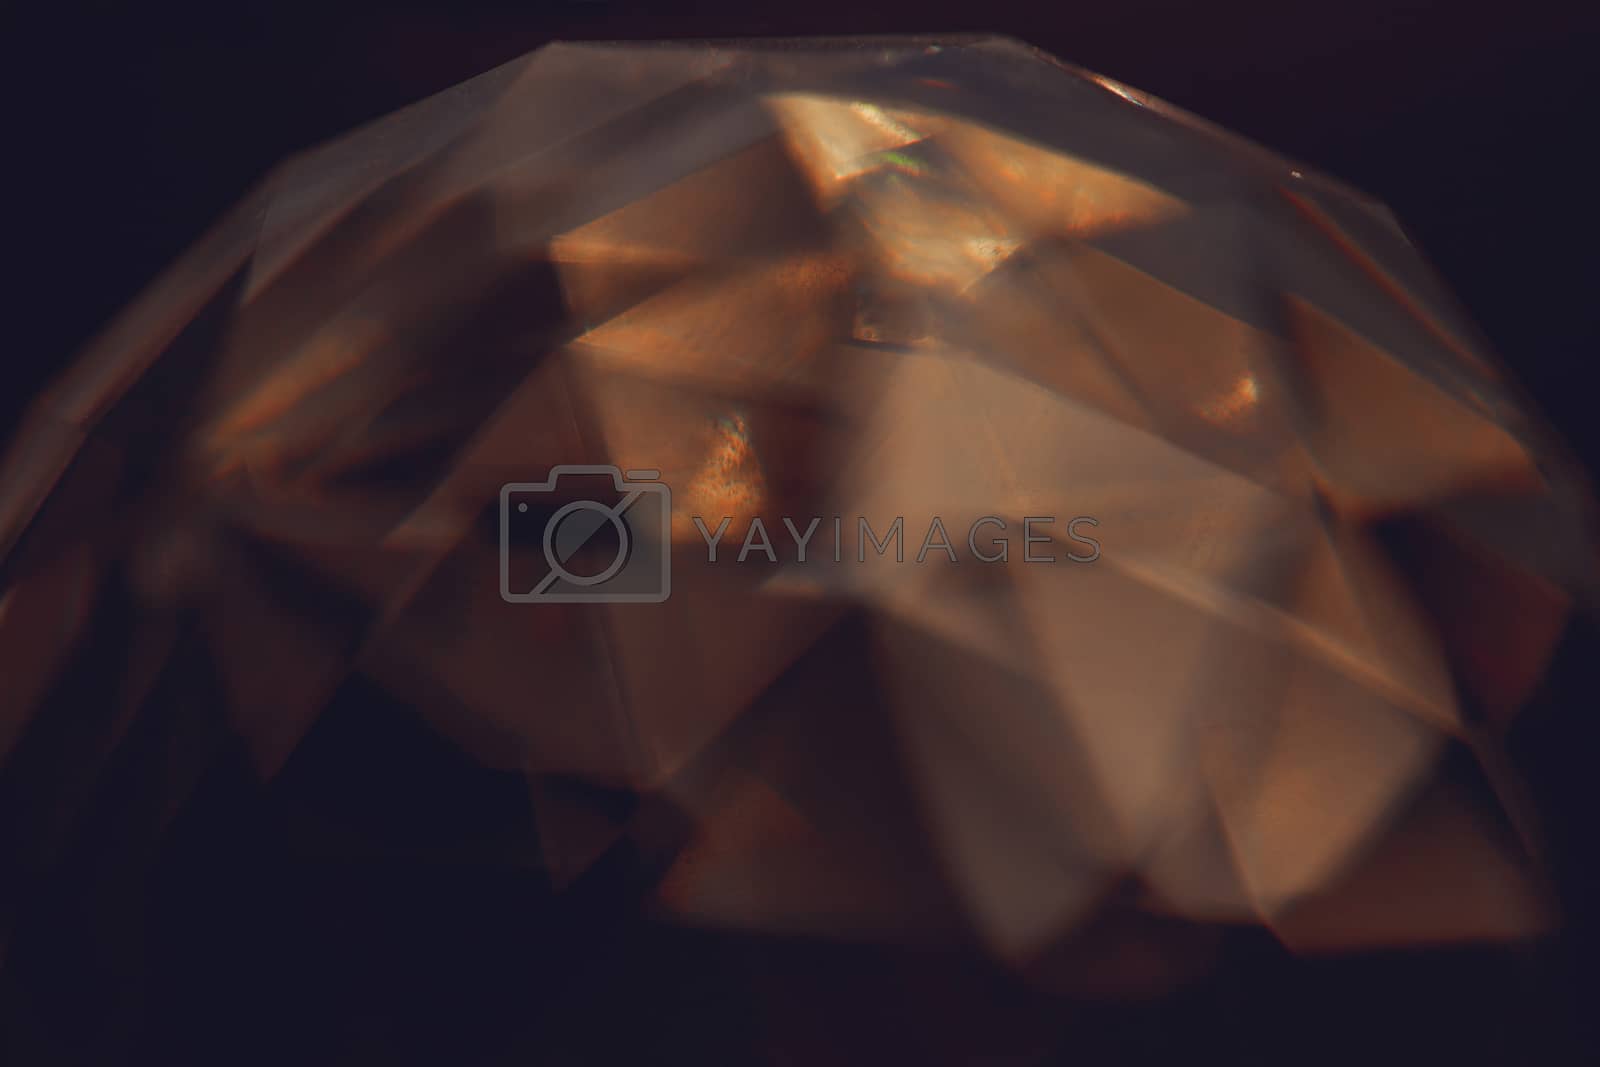 Royalty free image of Magic crystal sphere by tadeush89